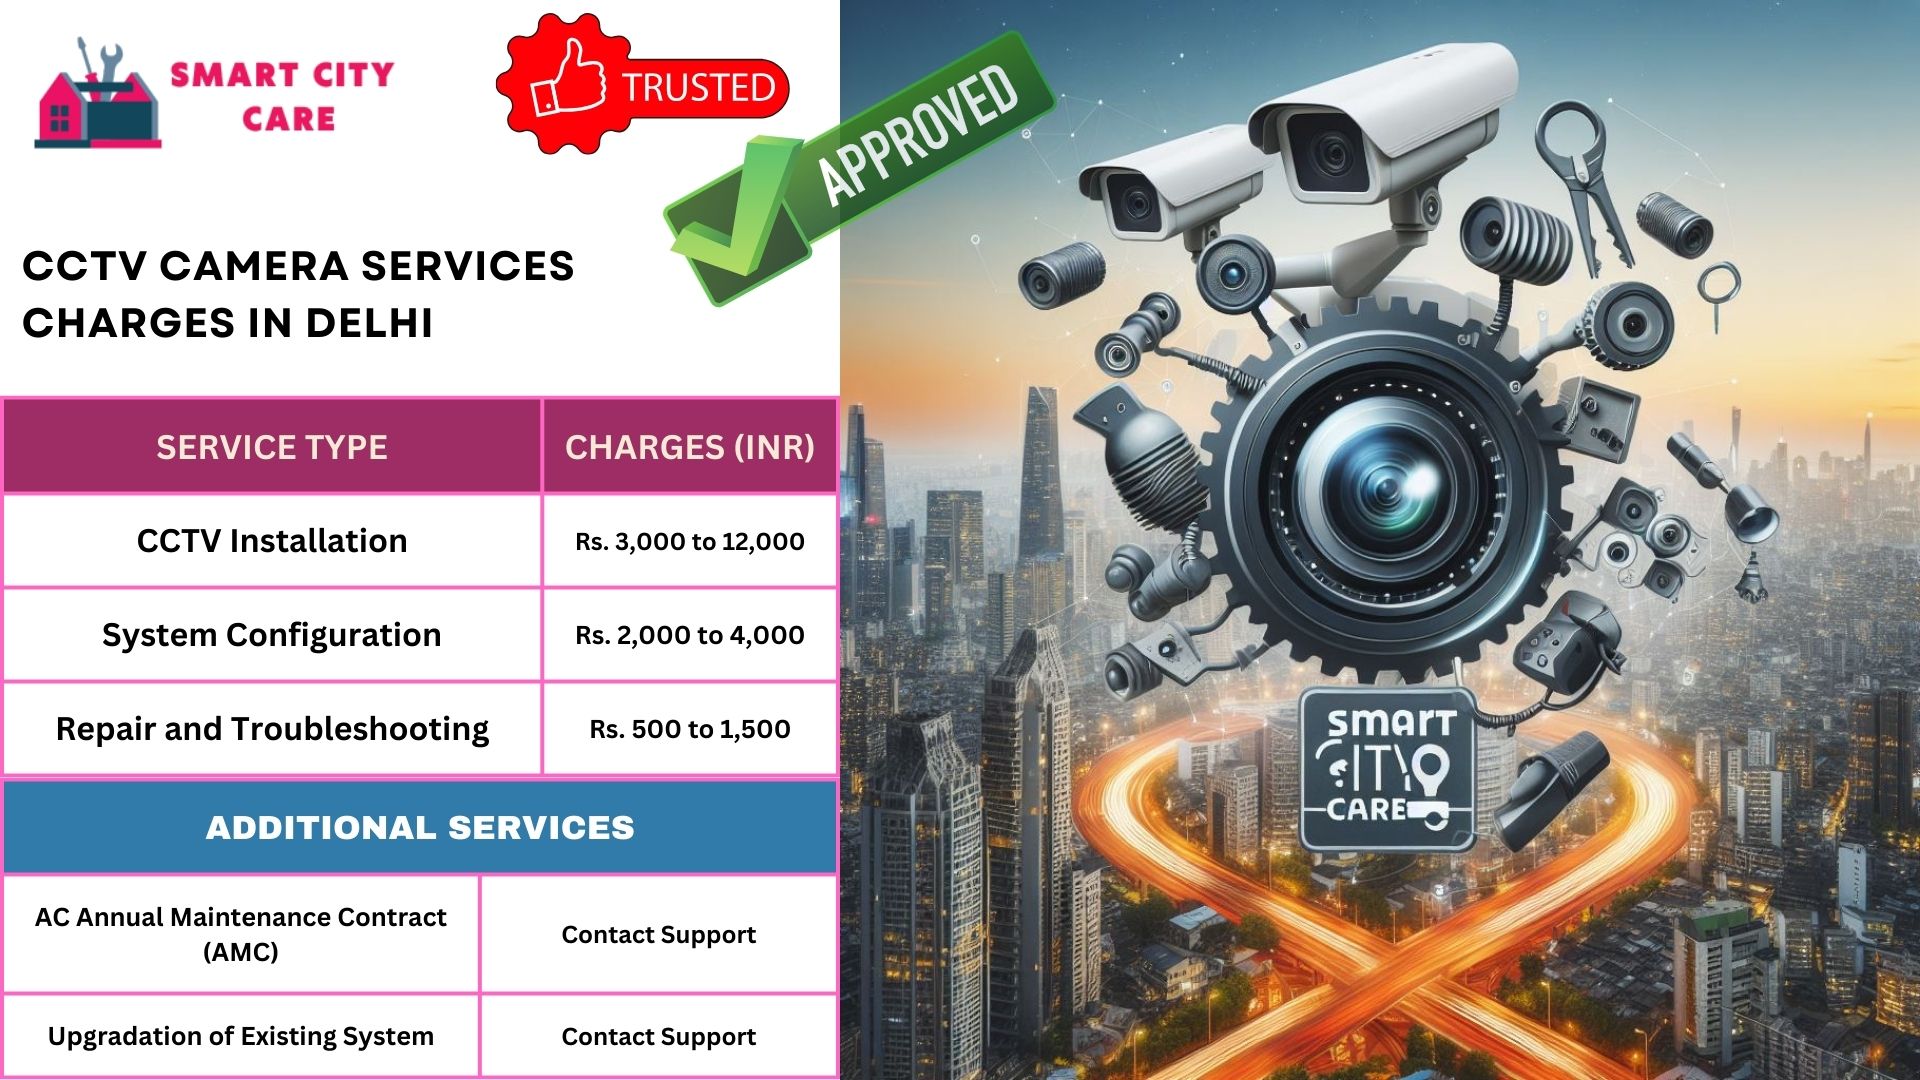 CCTV Camera Services Charges in Delhi